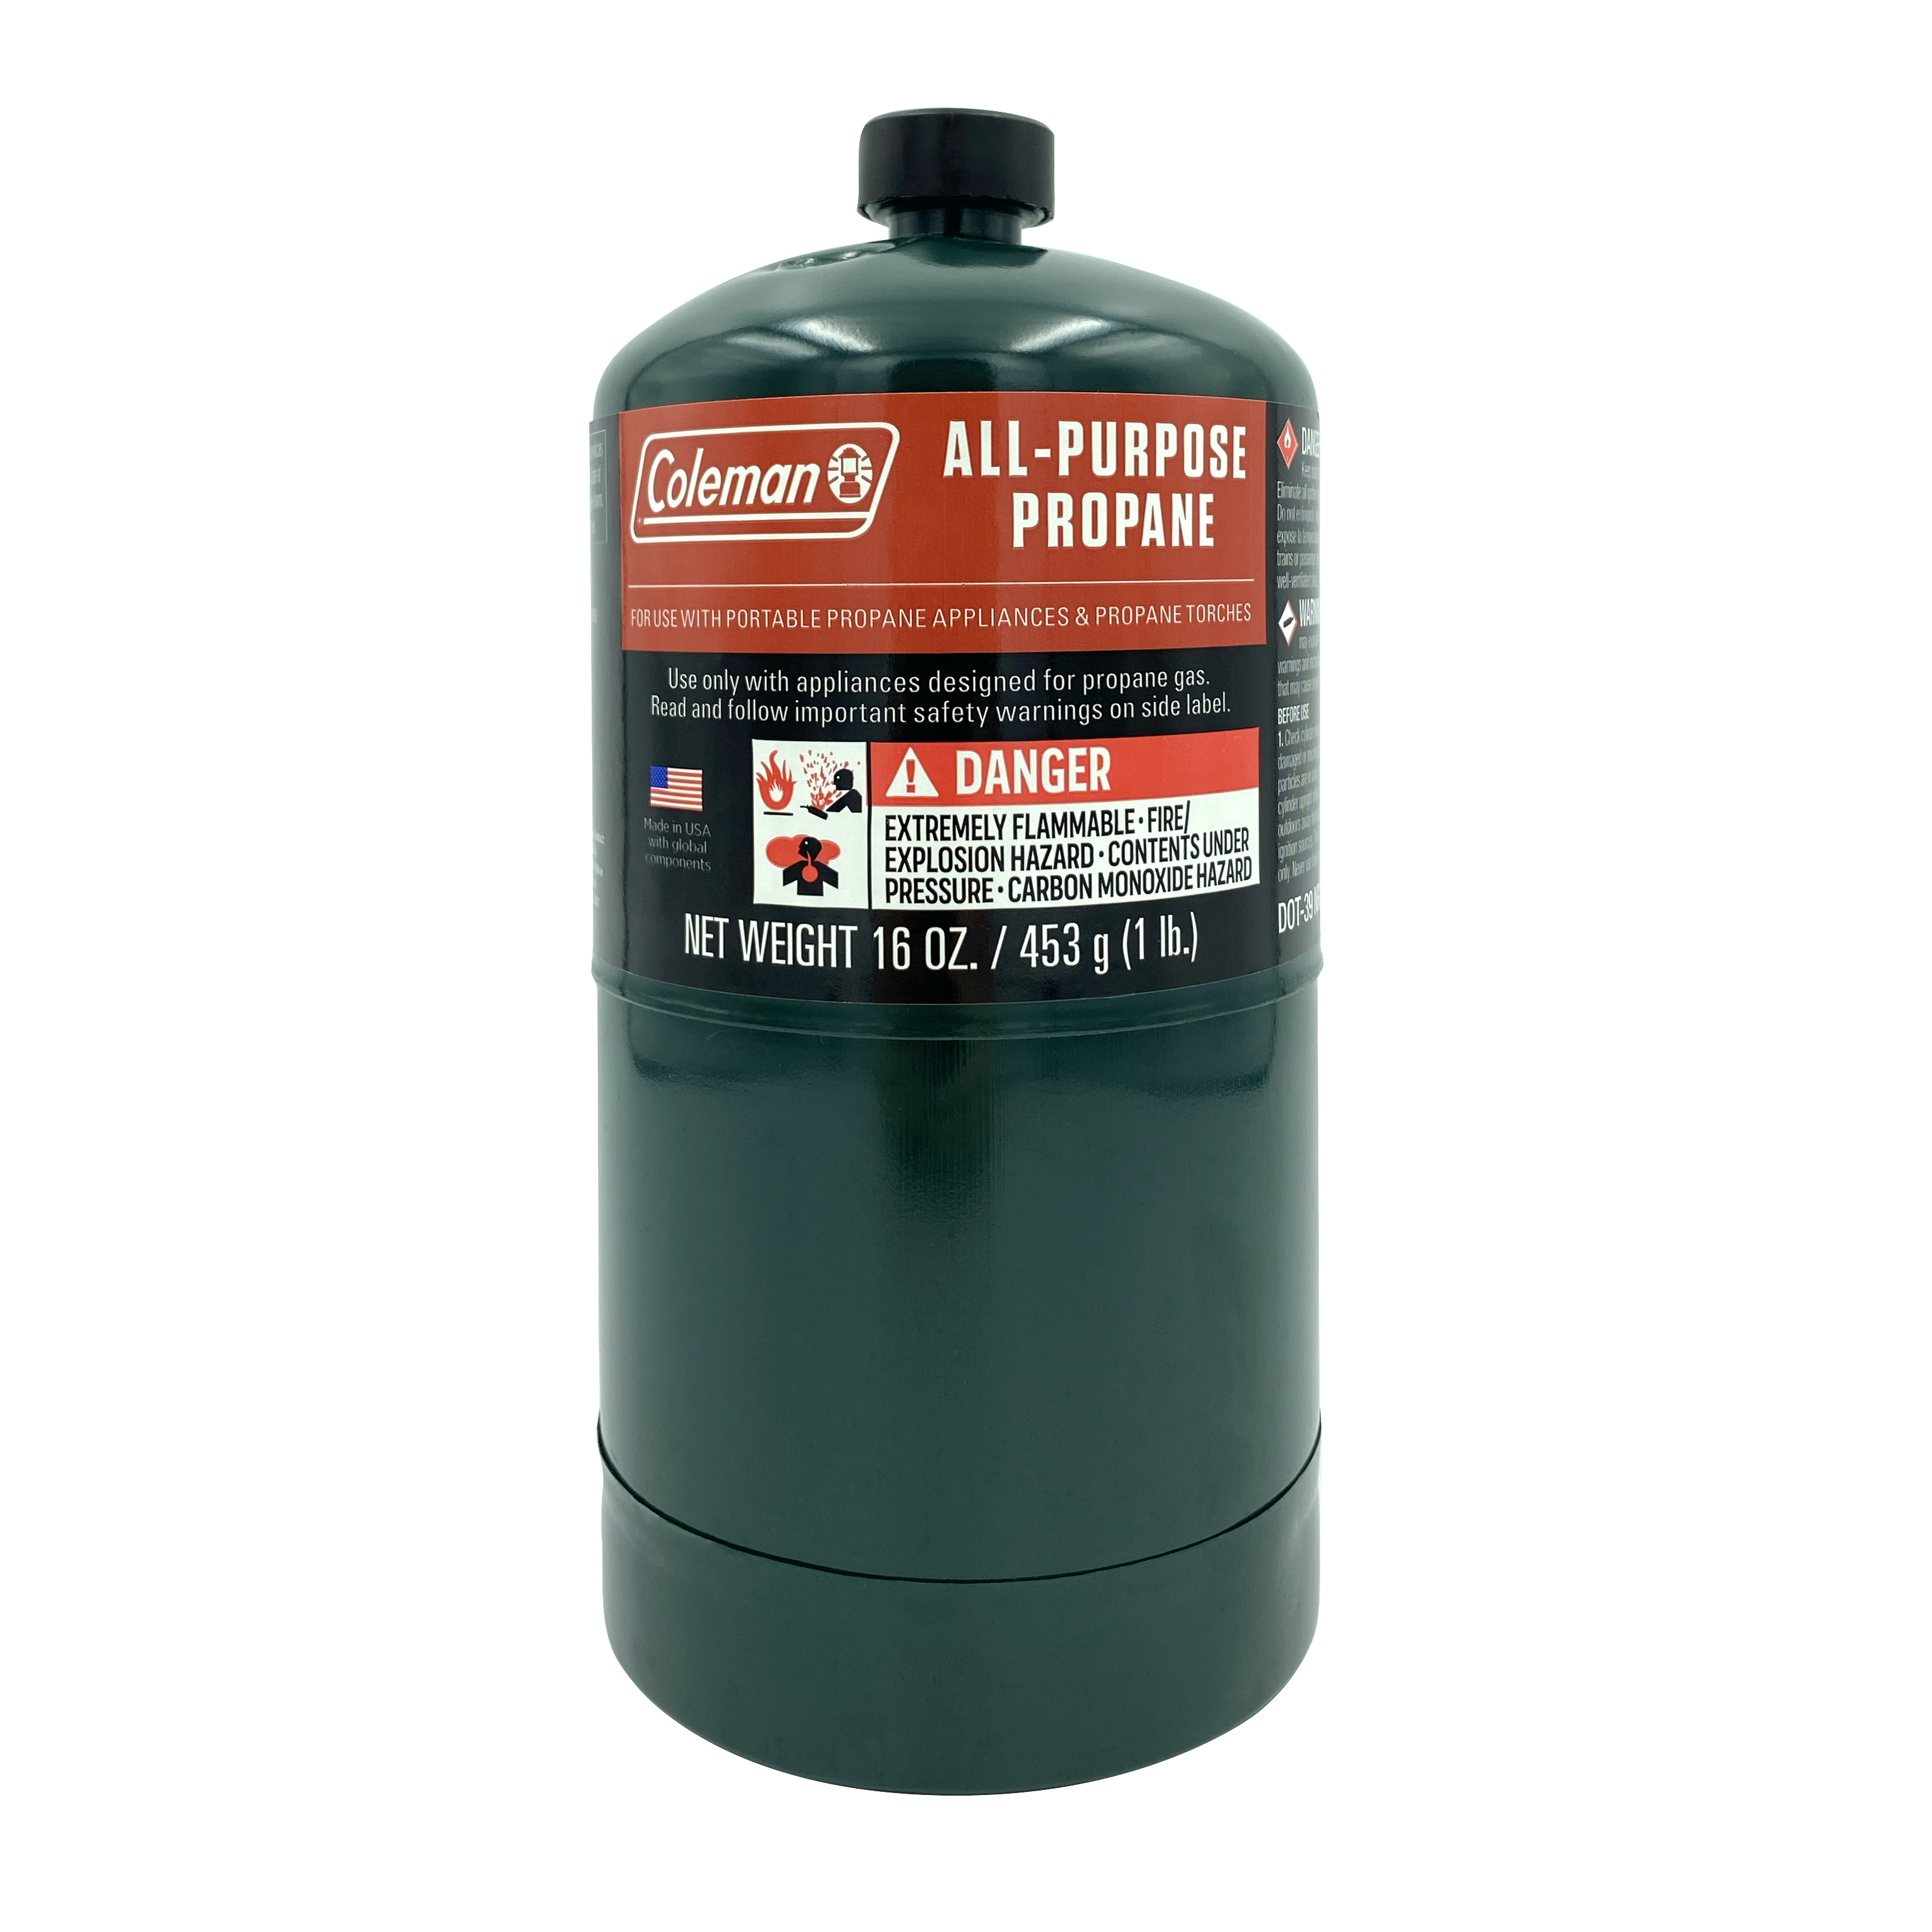 Coleman All-Purpose Propane Gas Cylinder, 16oz - image 1 of 6